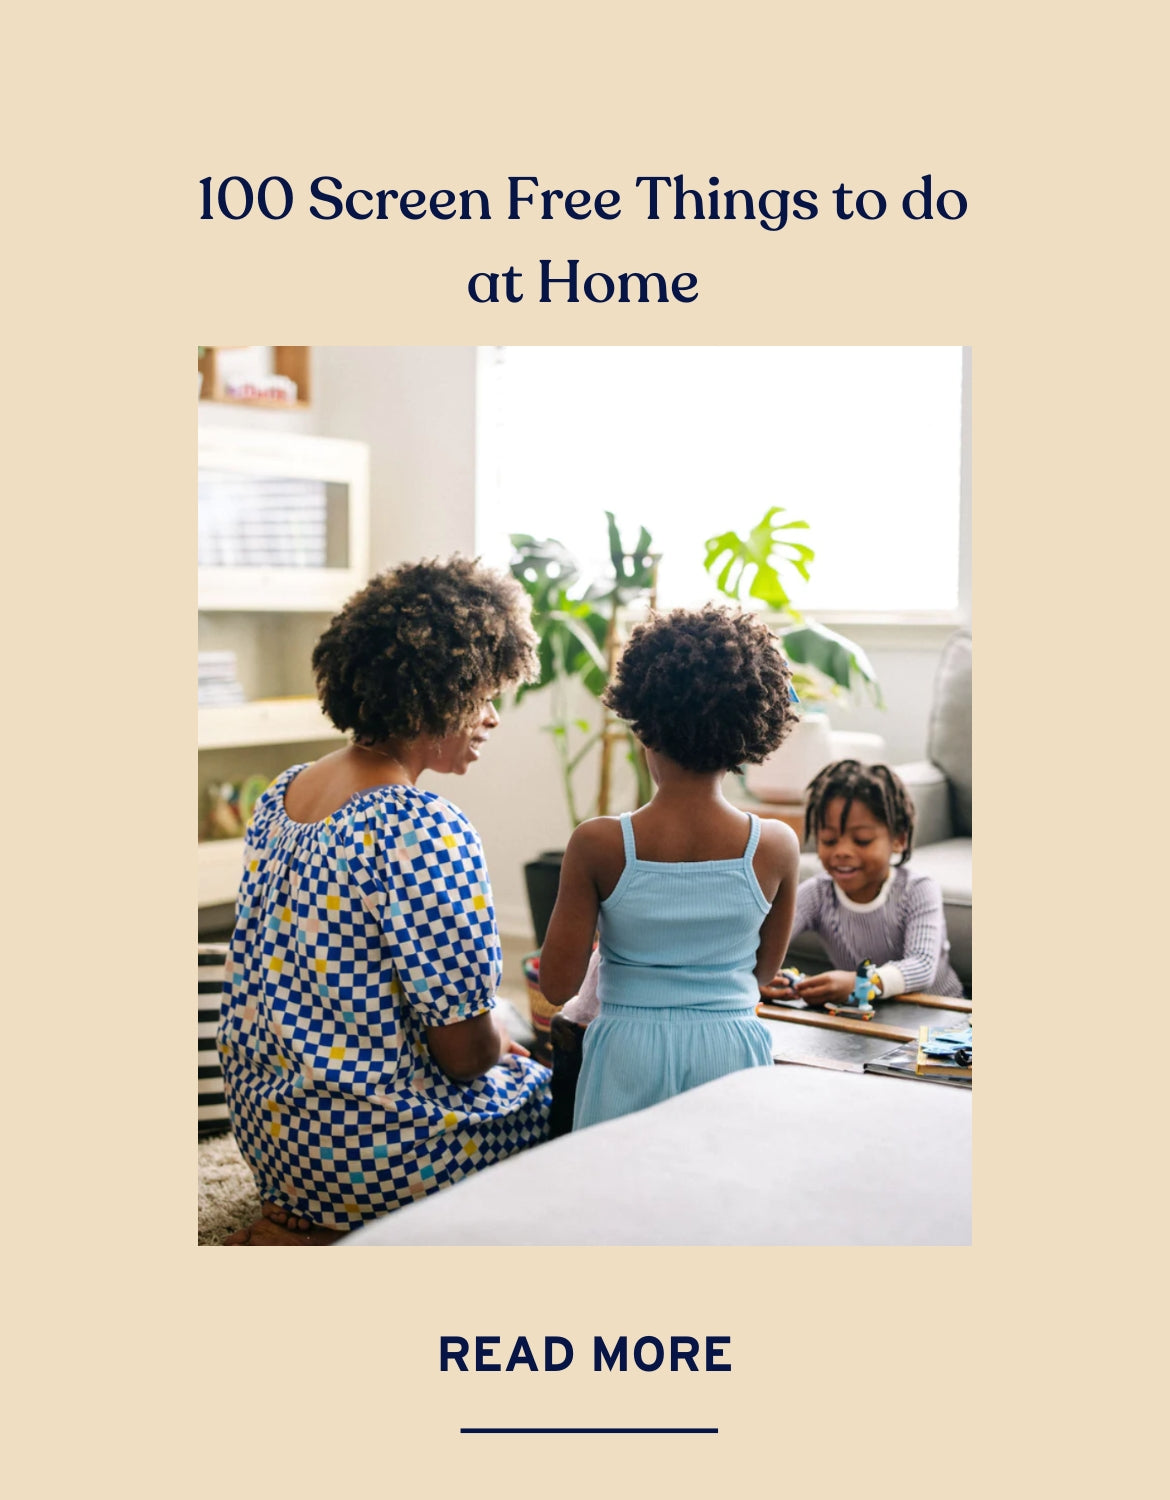 100 screen free things to do at home with kids